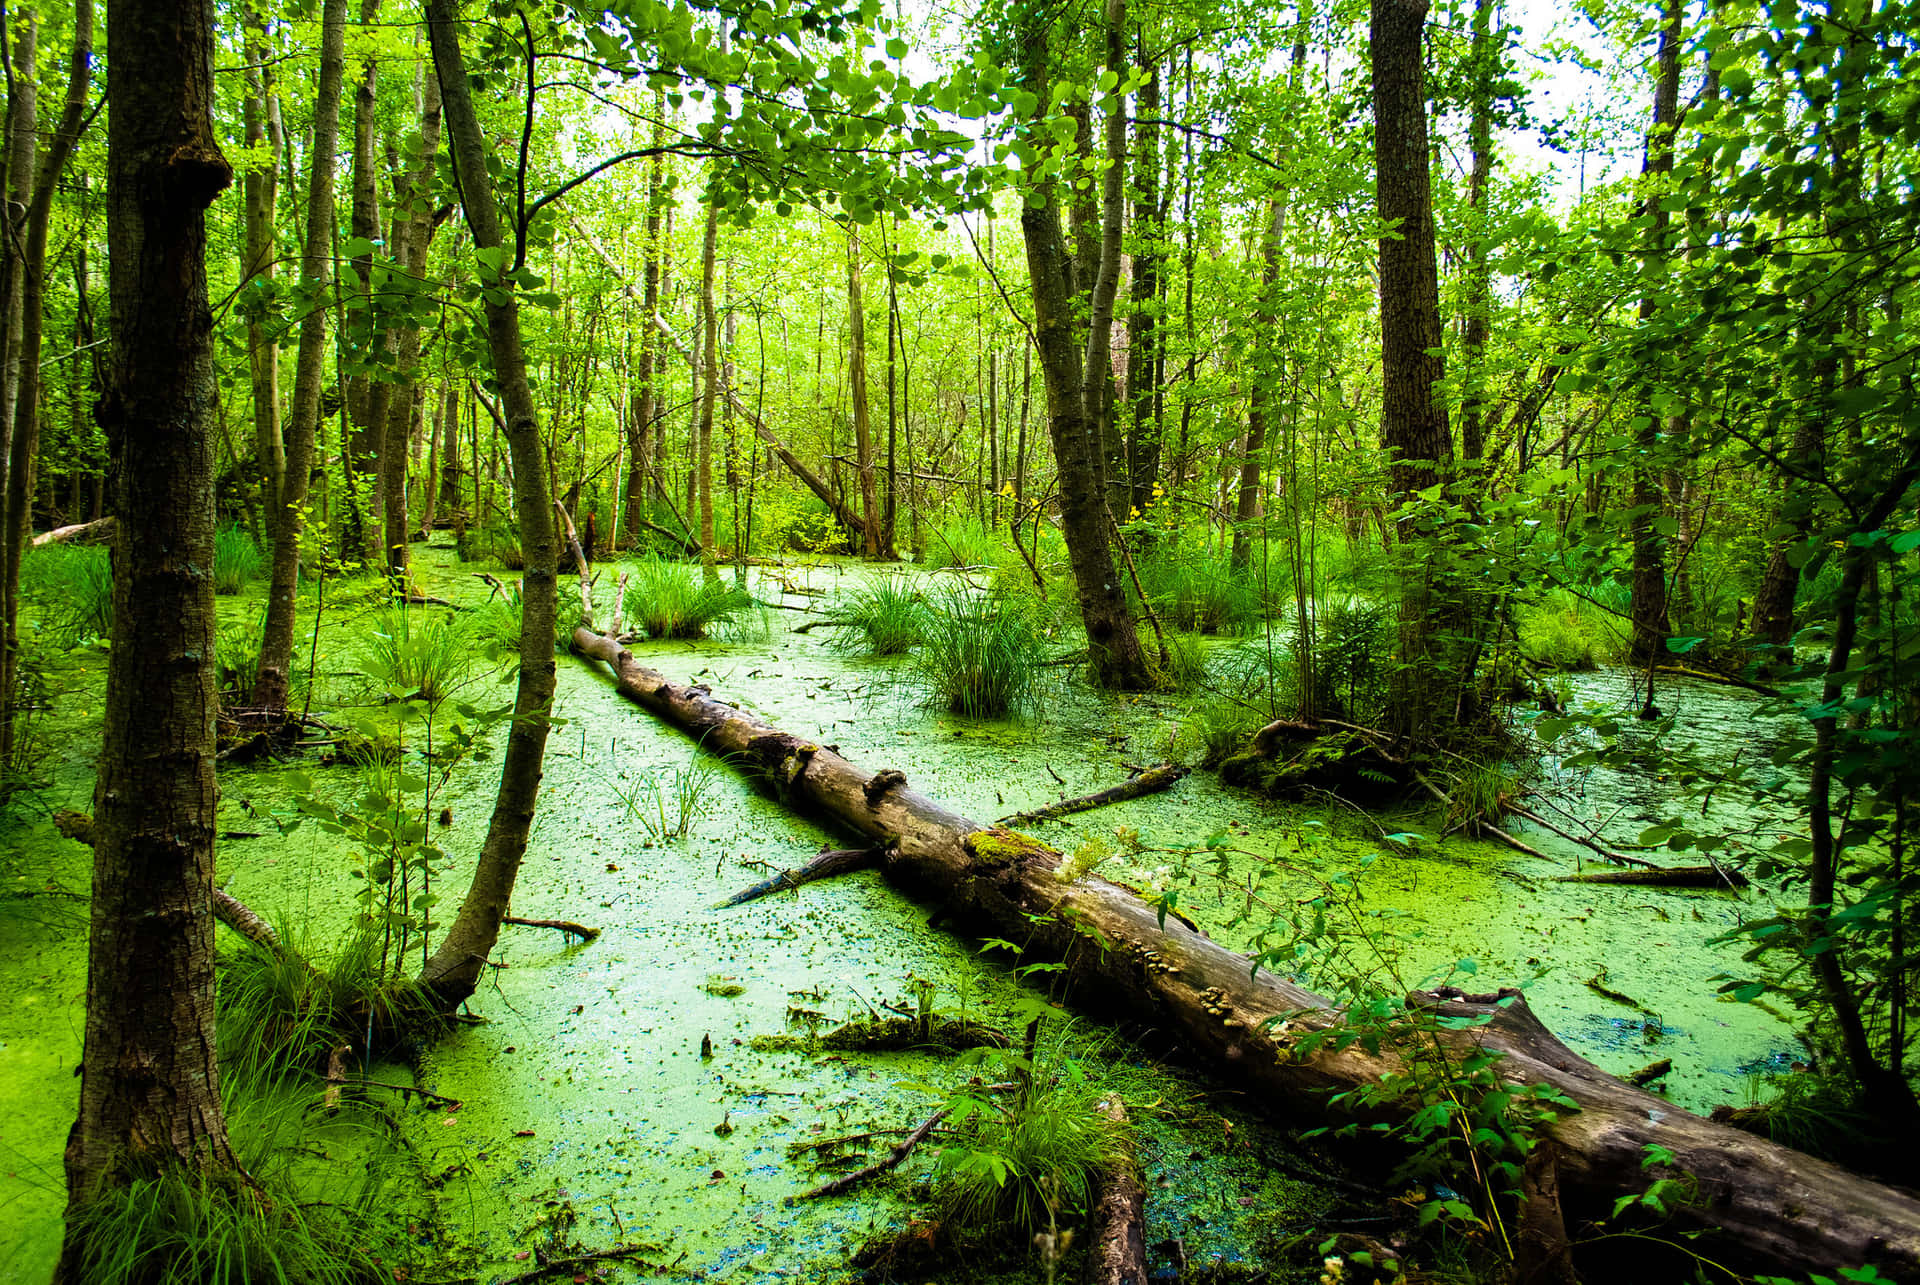 A Swamp With Green Algae And Trees